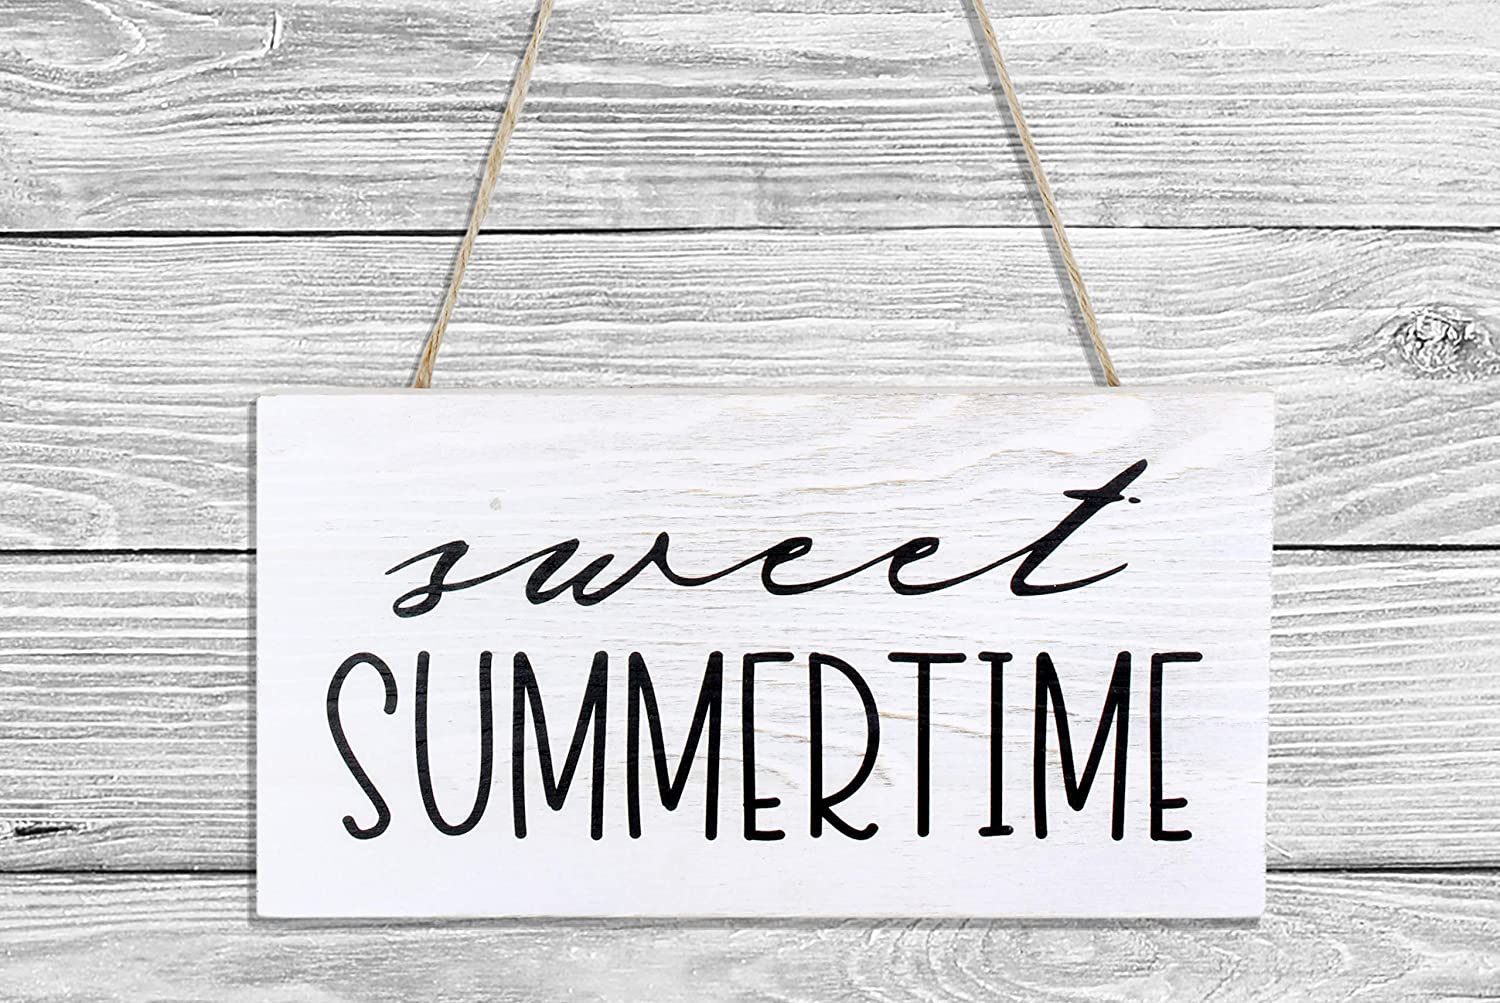 Sweet Summertime Wood Sign, Summer Rustic Distressed White Wooden Plaque